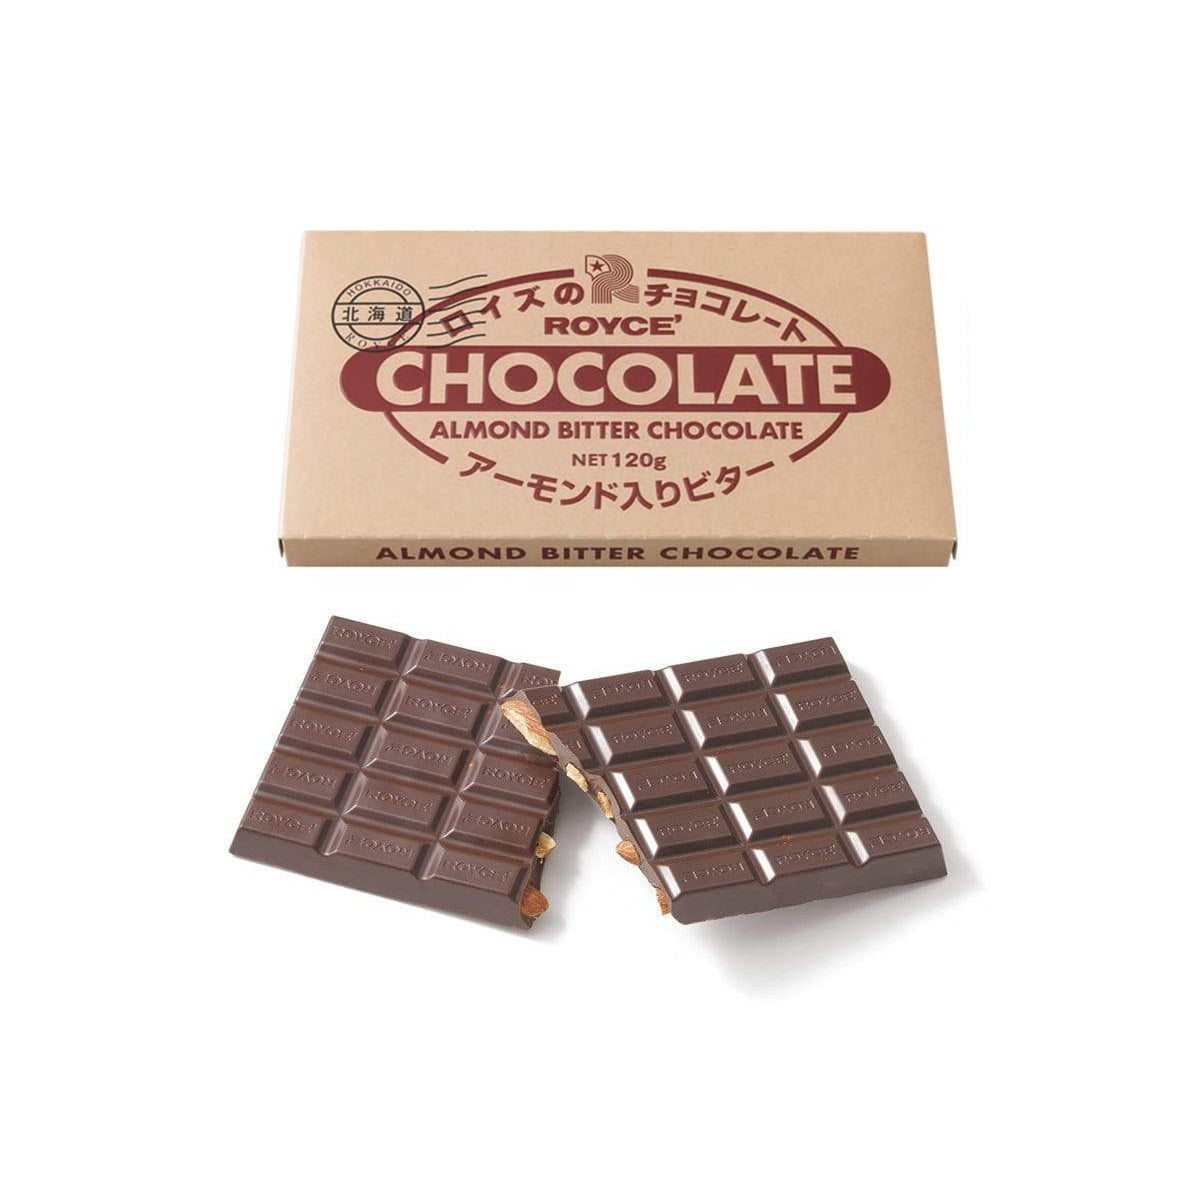 ROYCE' Chocolate - Chocolate Bar "Almond Bitter" - Image shows a chocolate carton on top. It has text in black saying Hokkaido ROYCE'. Text in red says ROYCE' Chocolate Almond Bitter Chocolate Net 120g. Text on bottom part says Almond Bitter Chocolate. Second image below features dark brown chocolate bars with almonds and the word "ROYCE'" engraved.